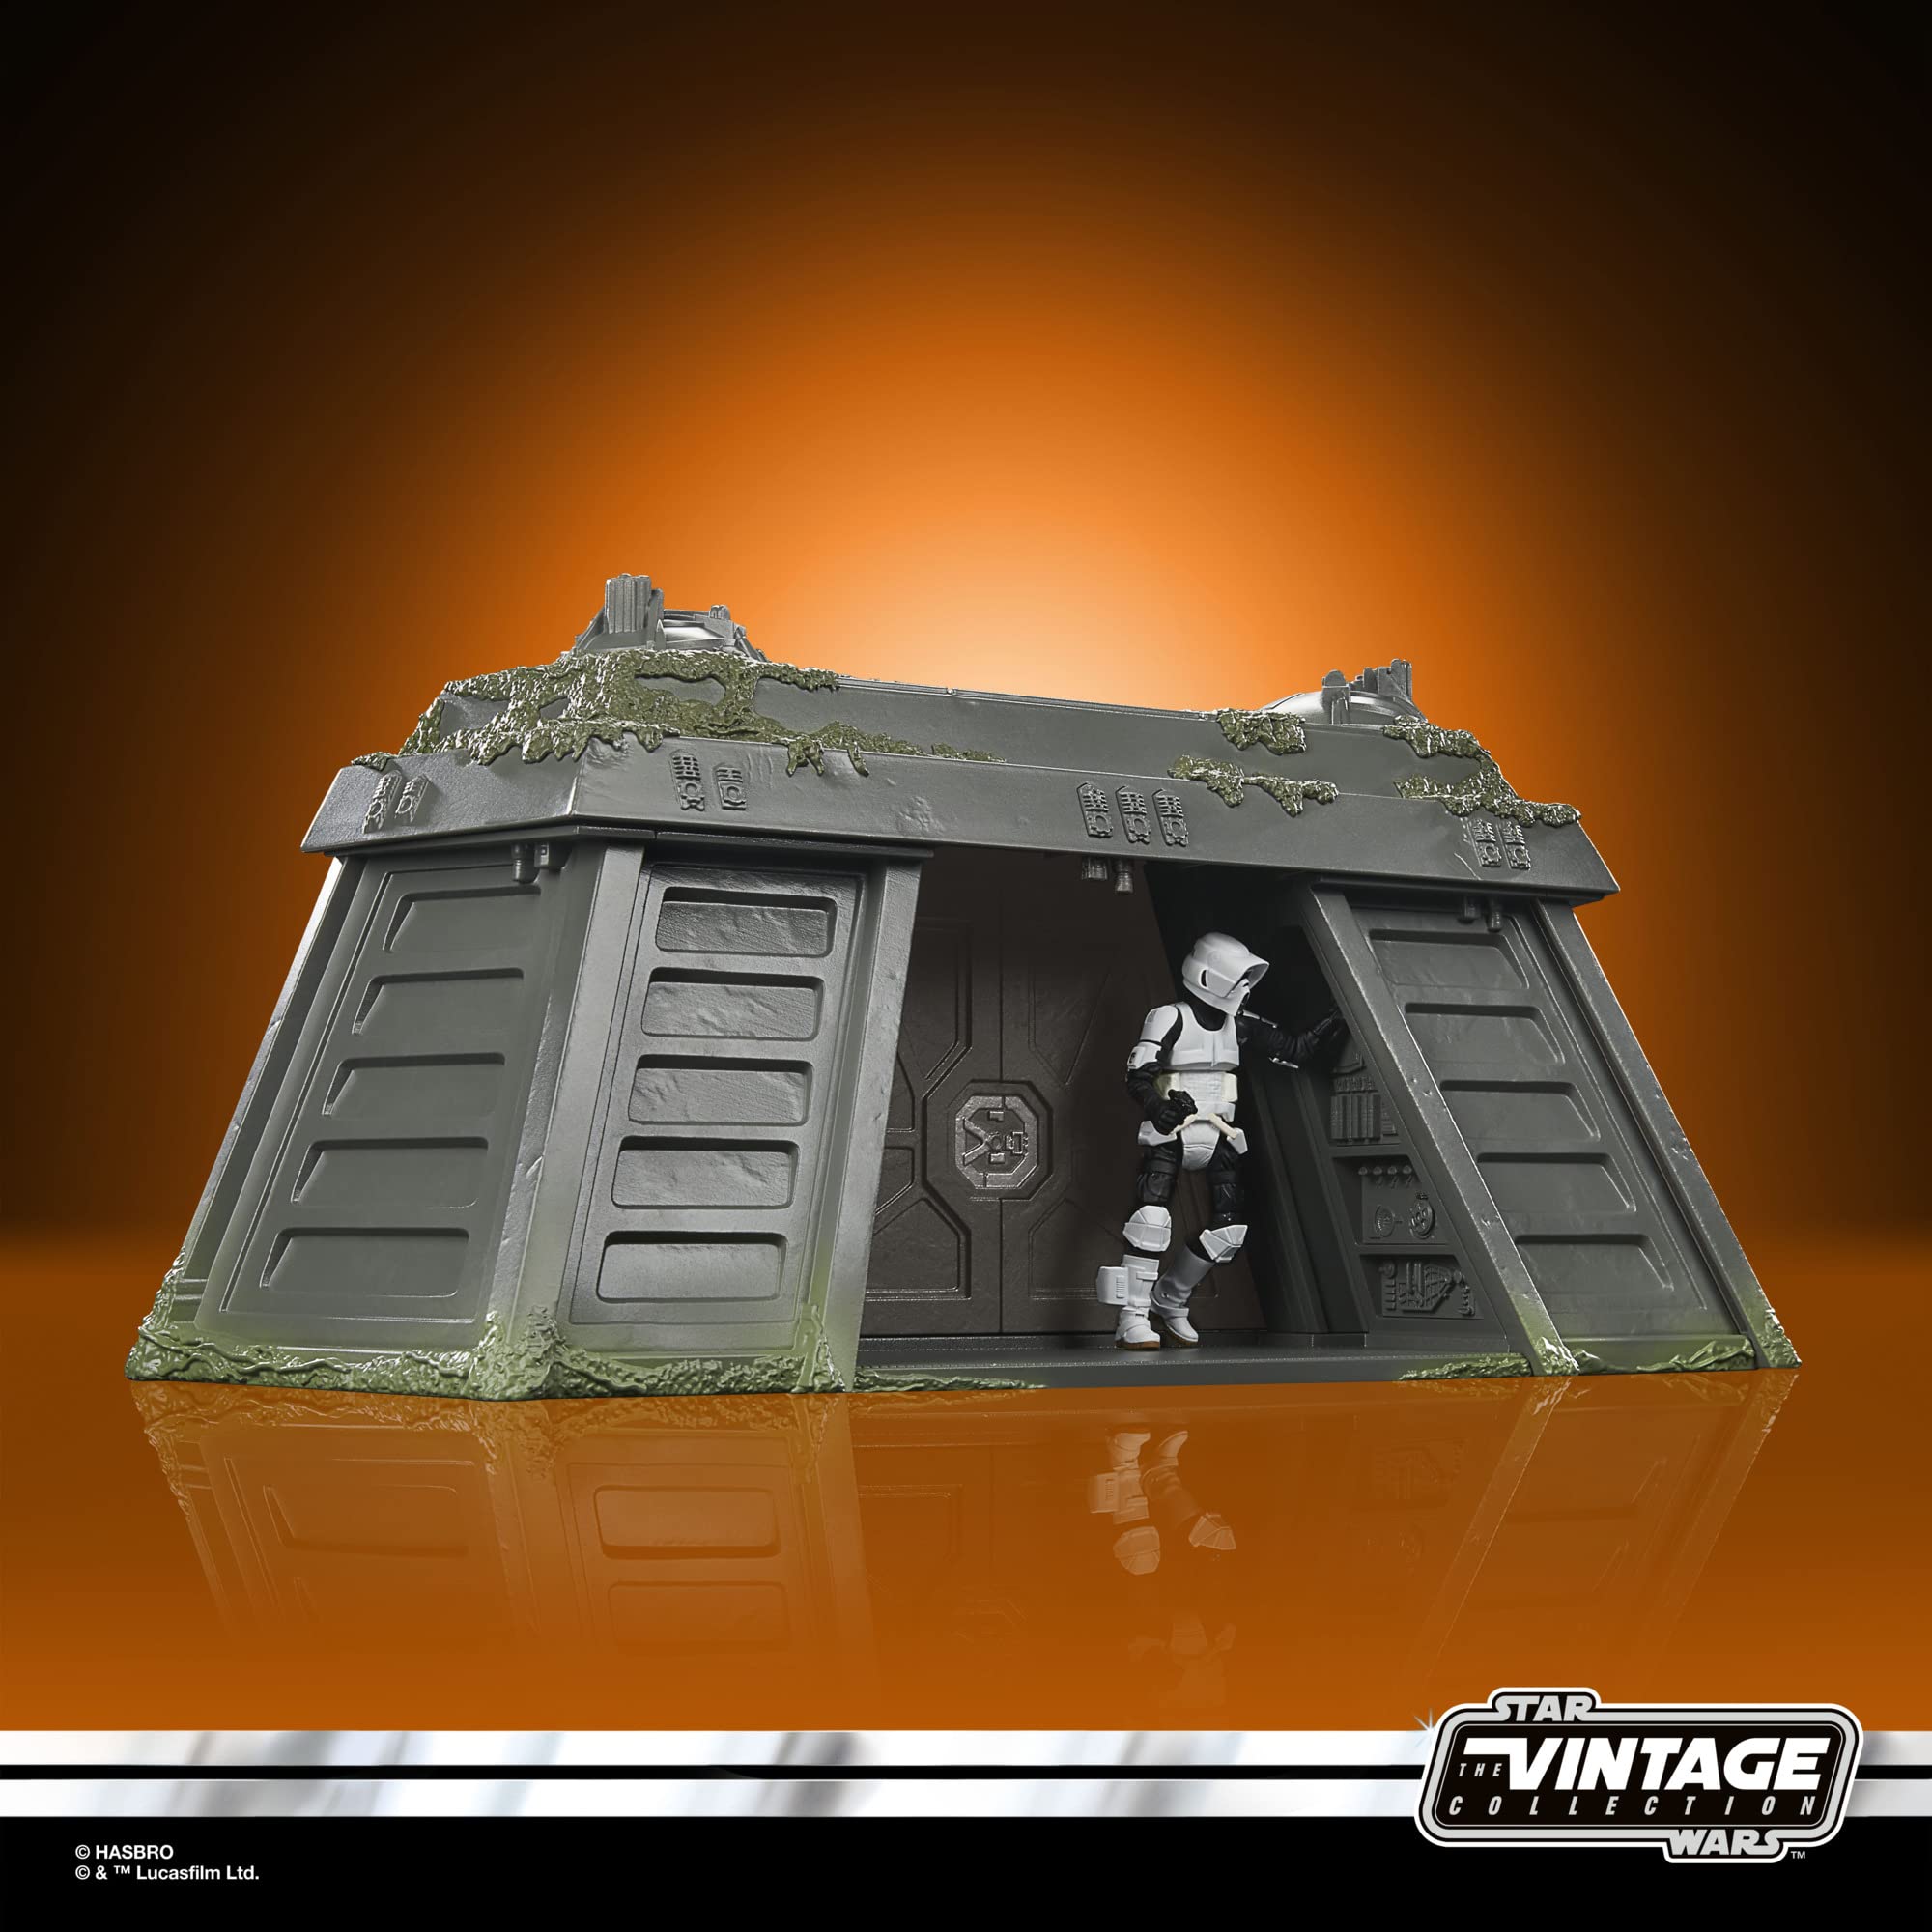 STAR WARS The Vintage Collection Endor Bunker, Return of The Jedi 3.75-Inch Collectible Playset with Action Figure, Ages 4 and Up